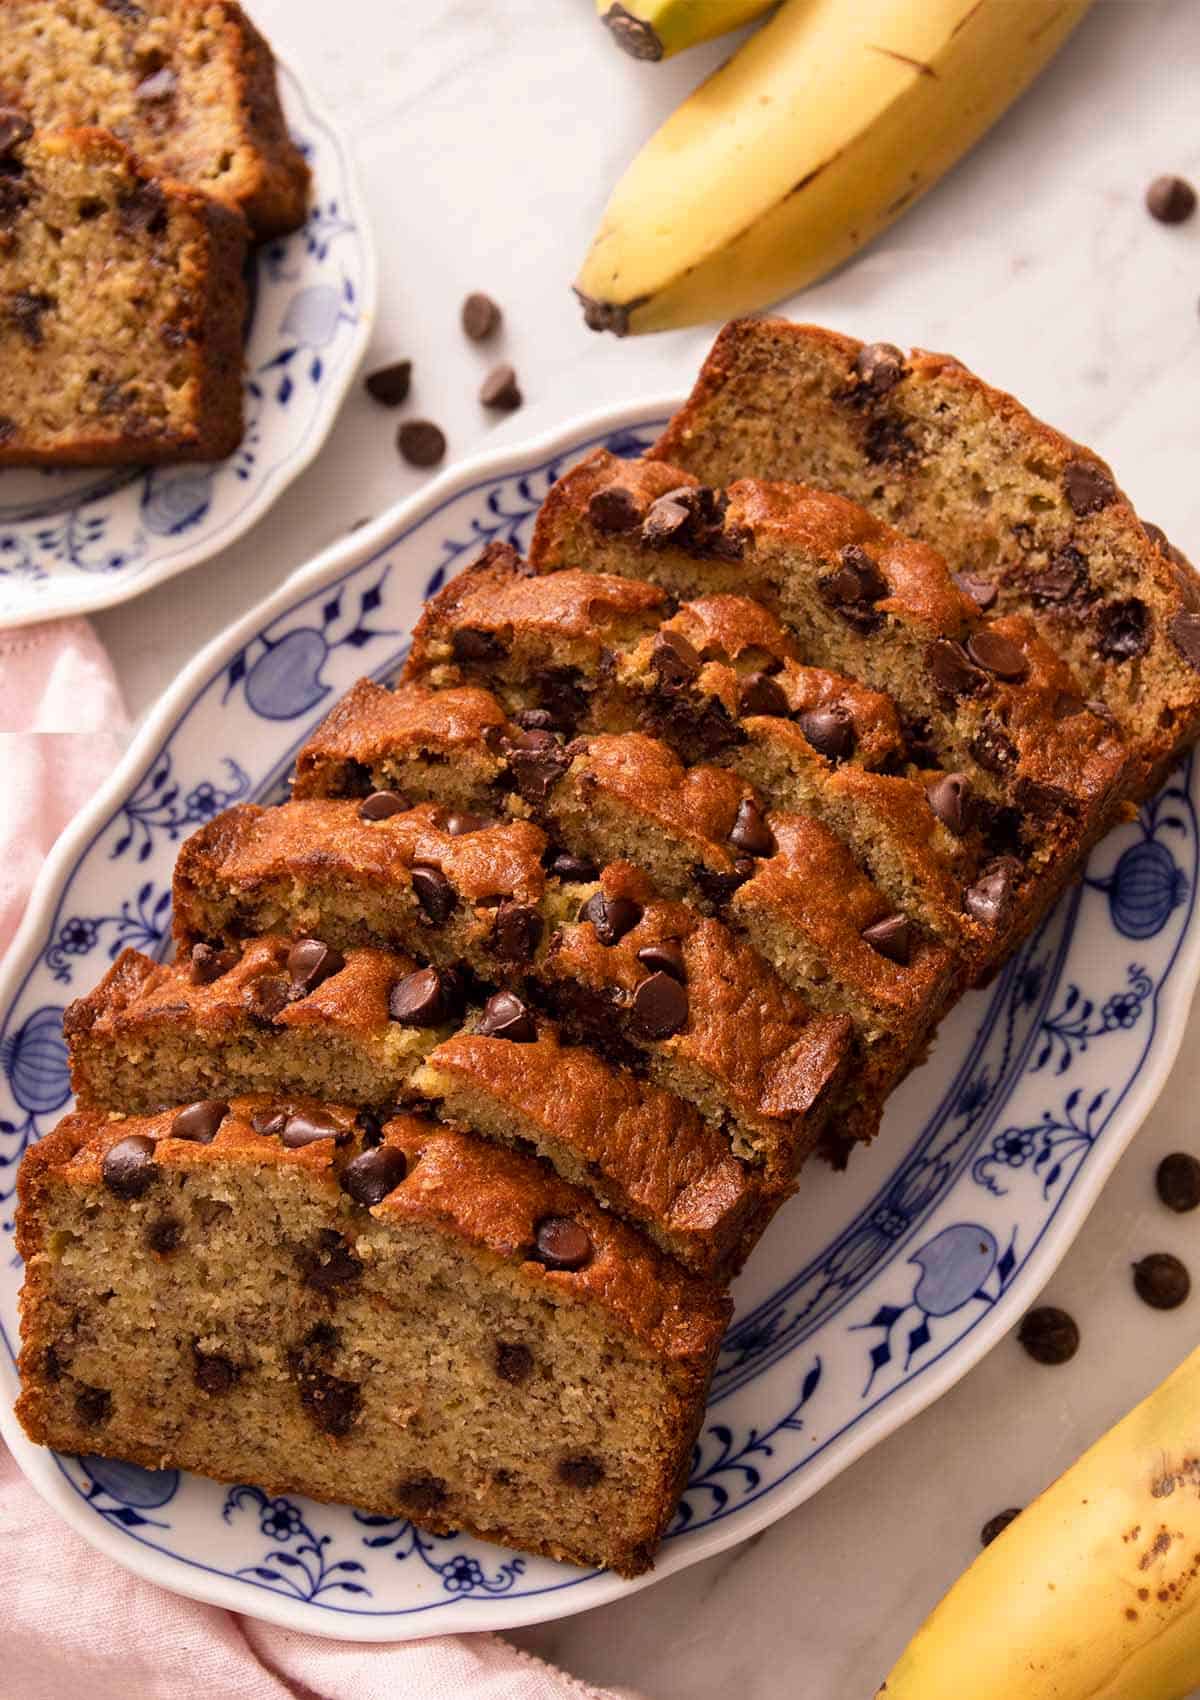 Slices of chocolate chip banana bread on a blue serving plate